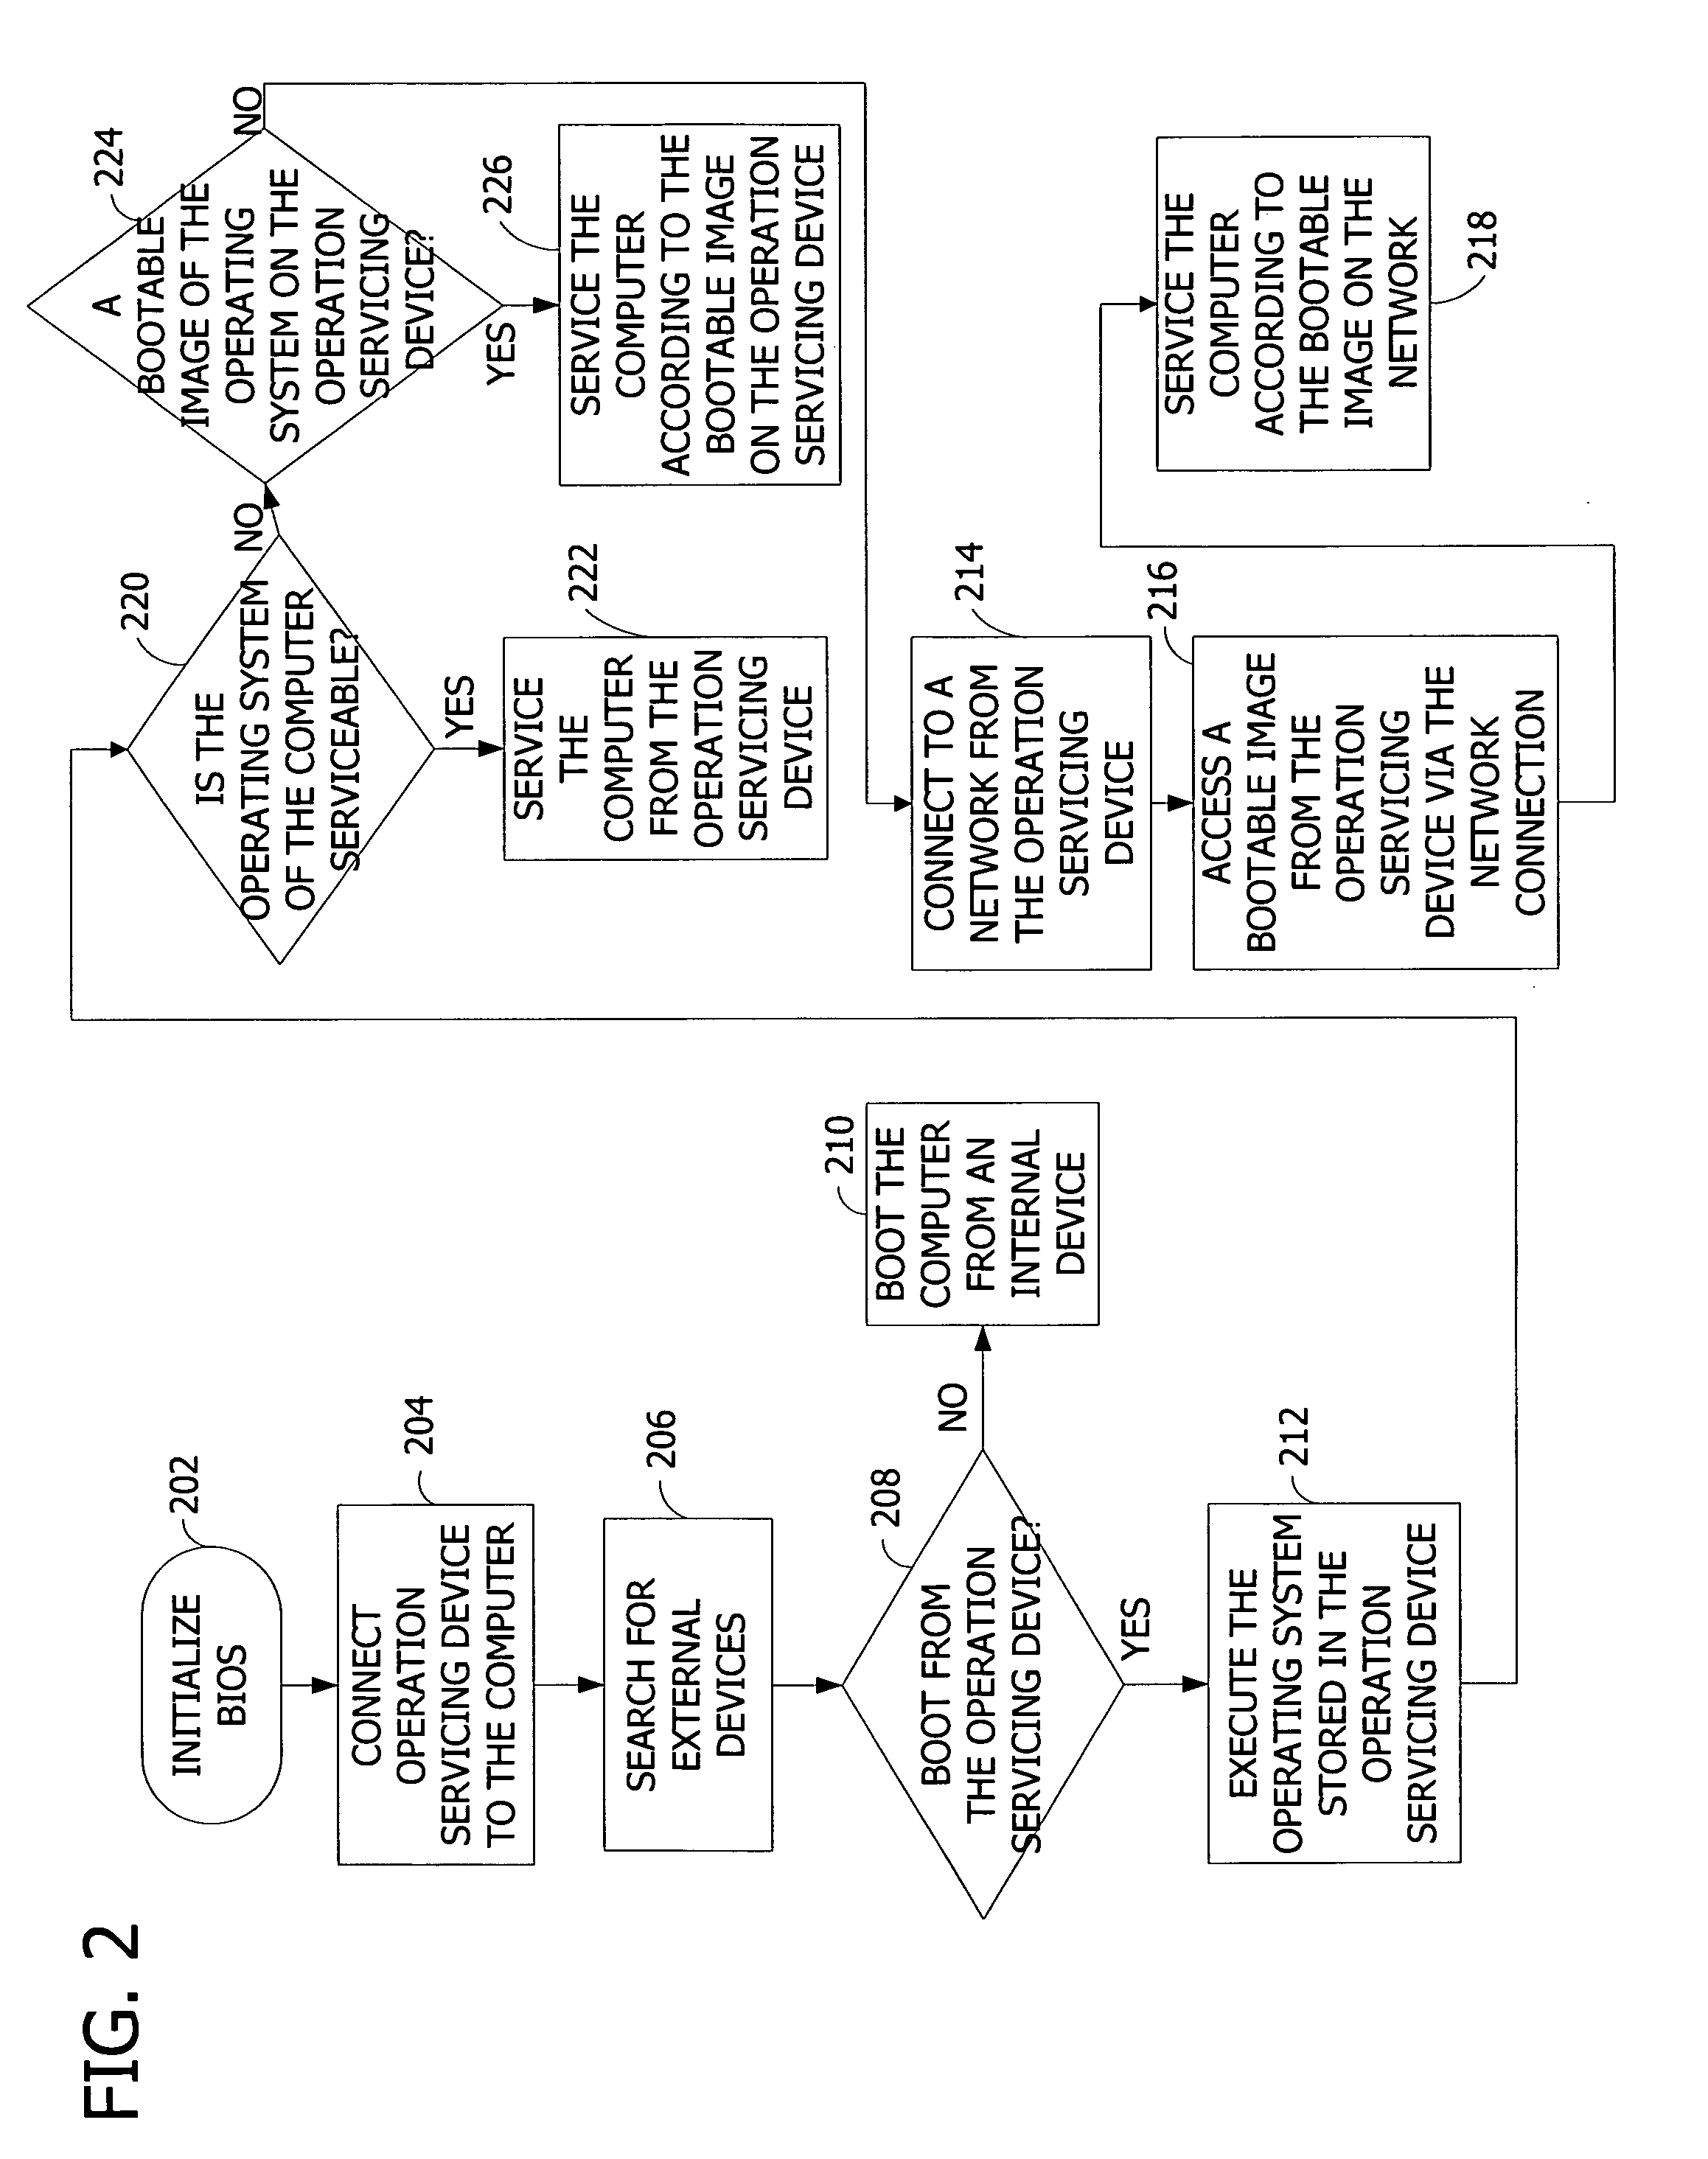 Self-contained computer servicing device